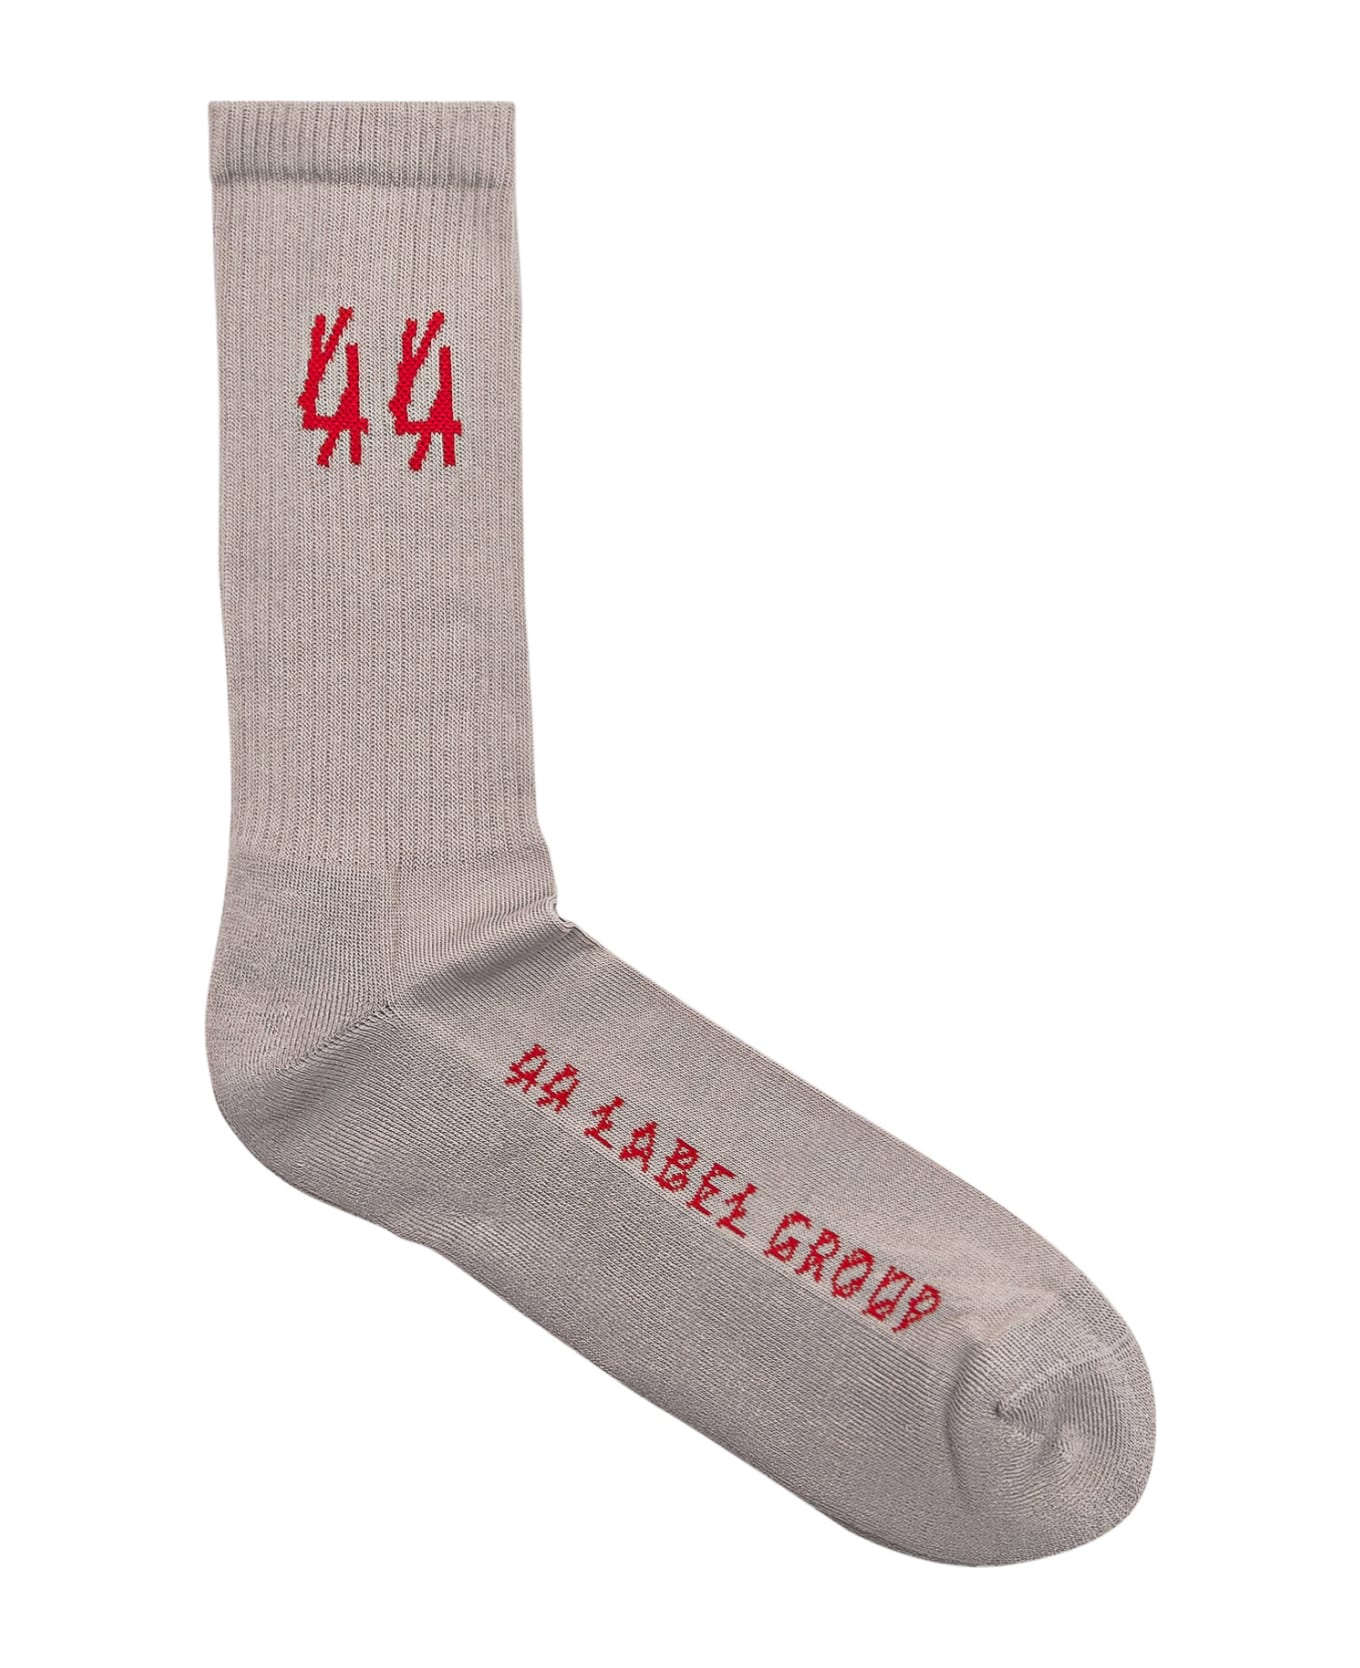 44 Label Group Socks With Logo - GYPS 44 RISK RED